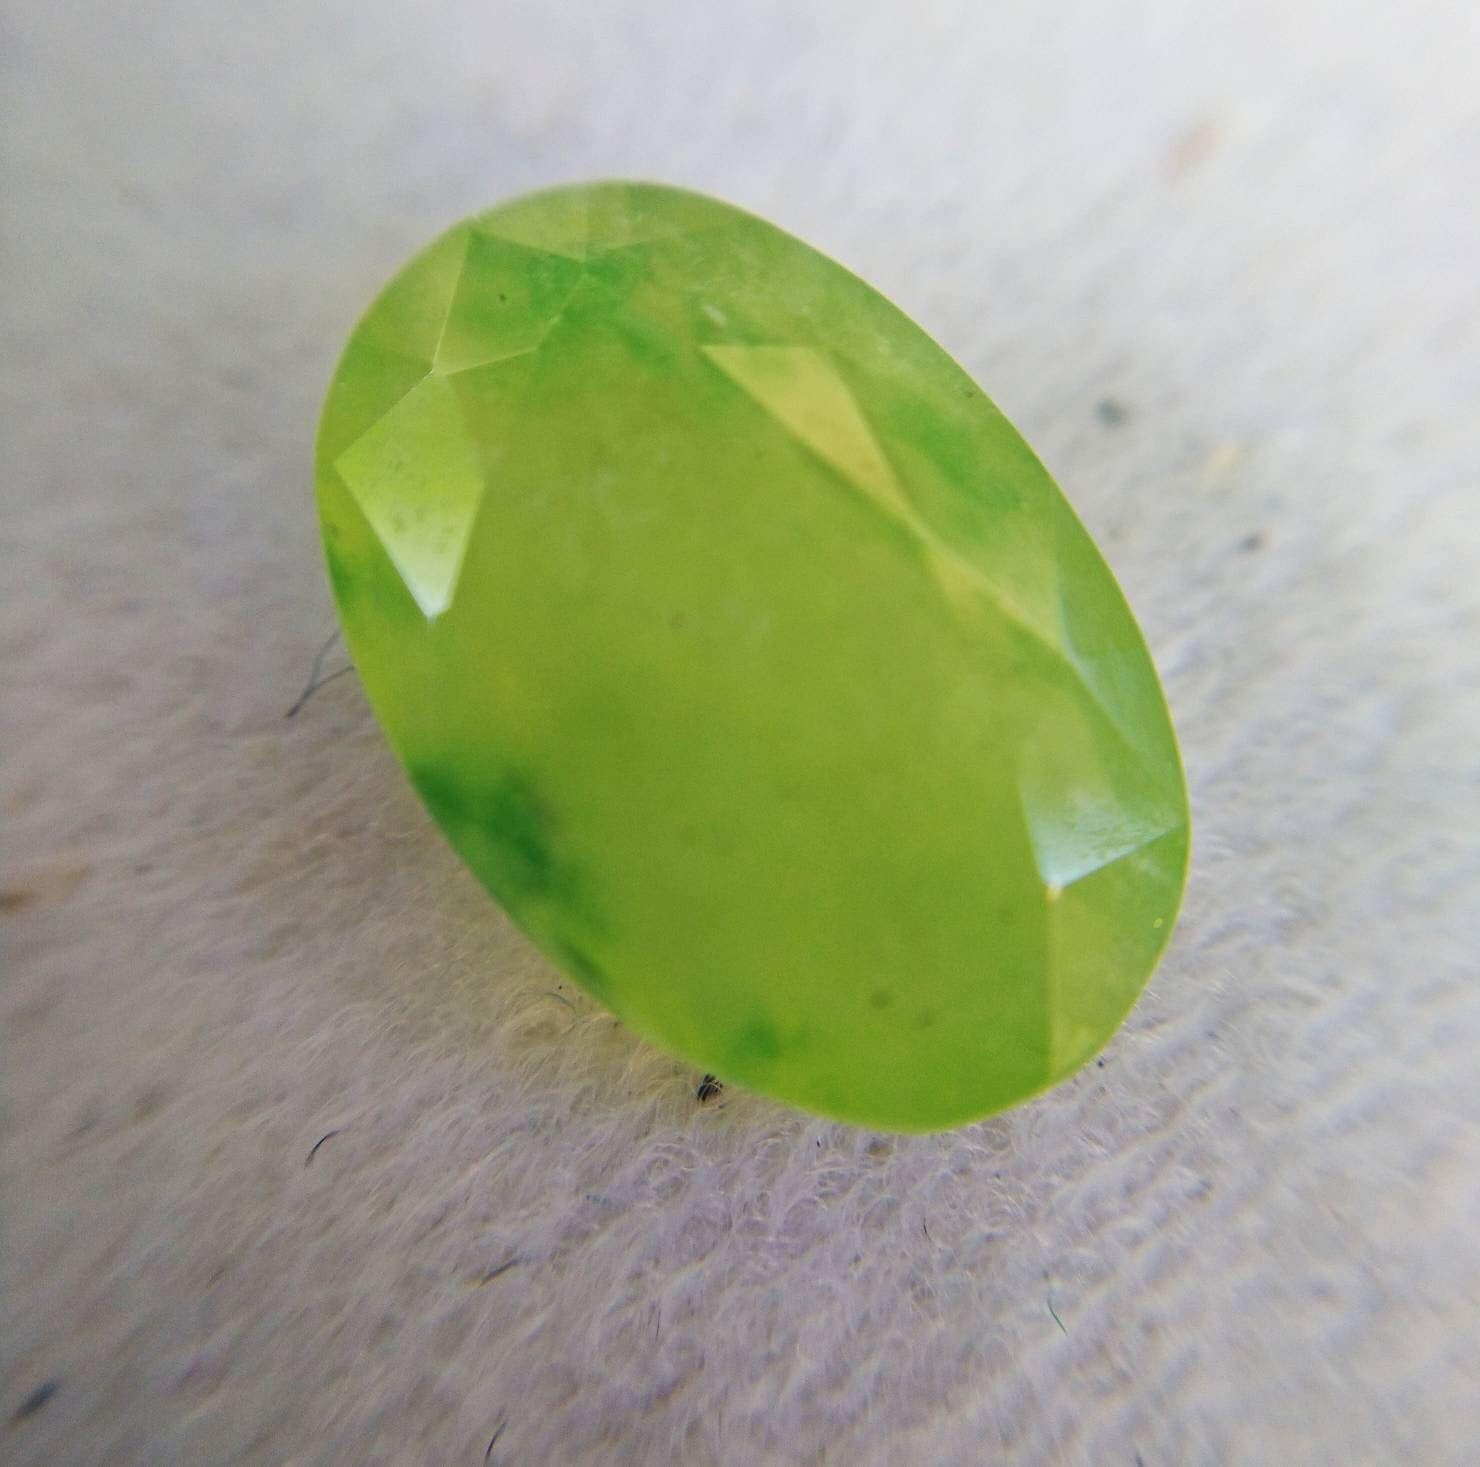 ARSAA GEMS AND MINERALSNatural top quality beautiful 5.5 carats oval shape faceted green hydrograssular garnet gem - Premium  from ARSAA GEMS AND MINERALS - Just $15.00! Shop now at ARSAA GEMS AND MINERALS